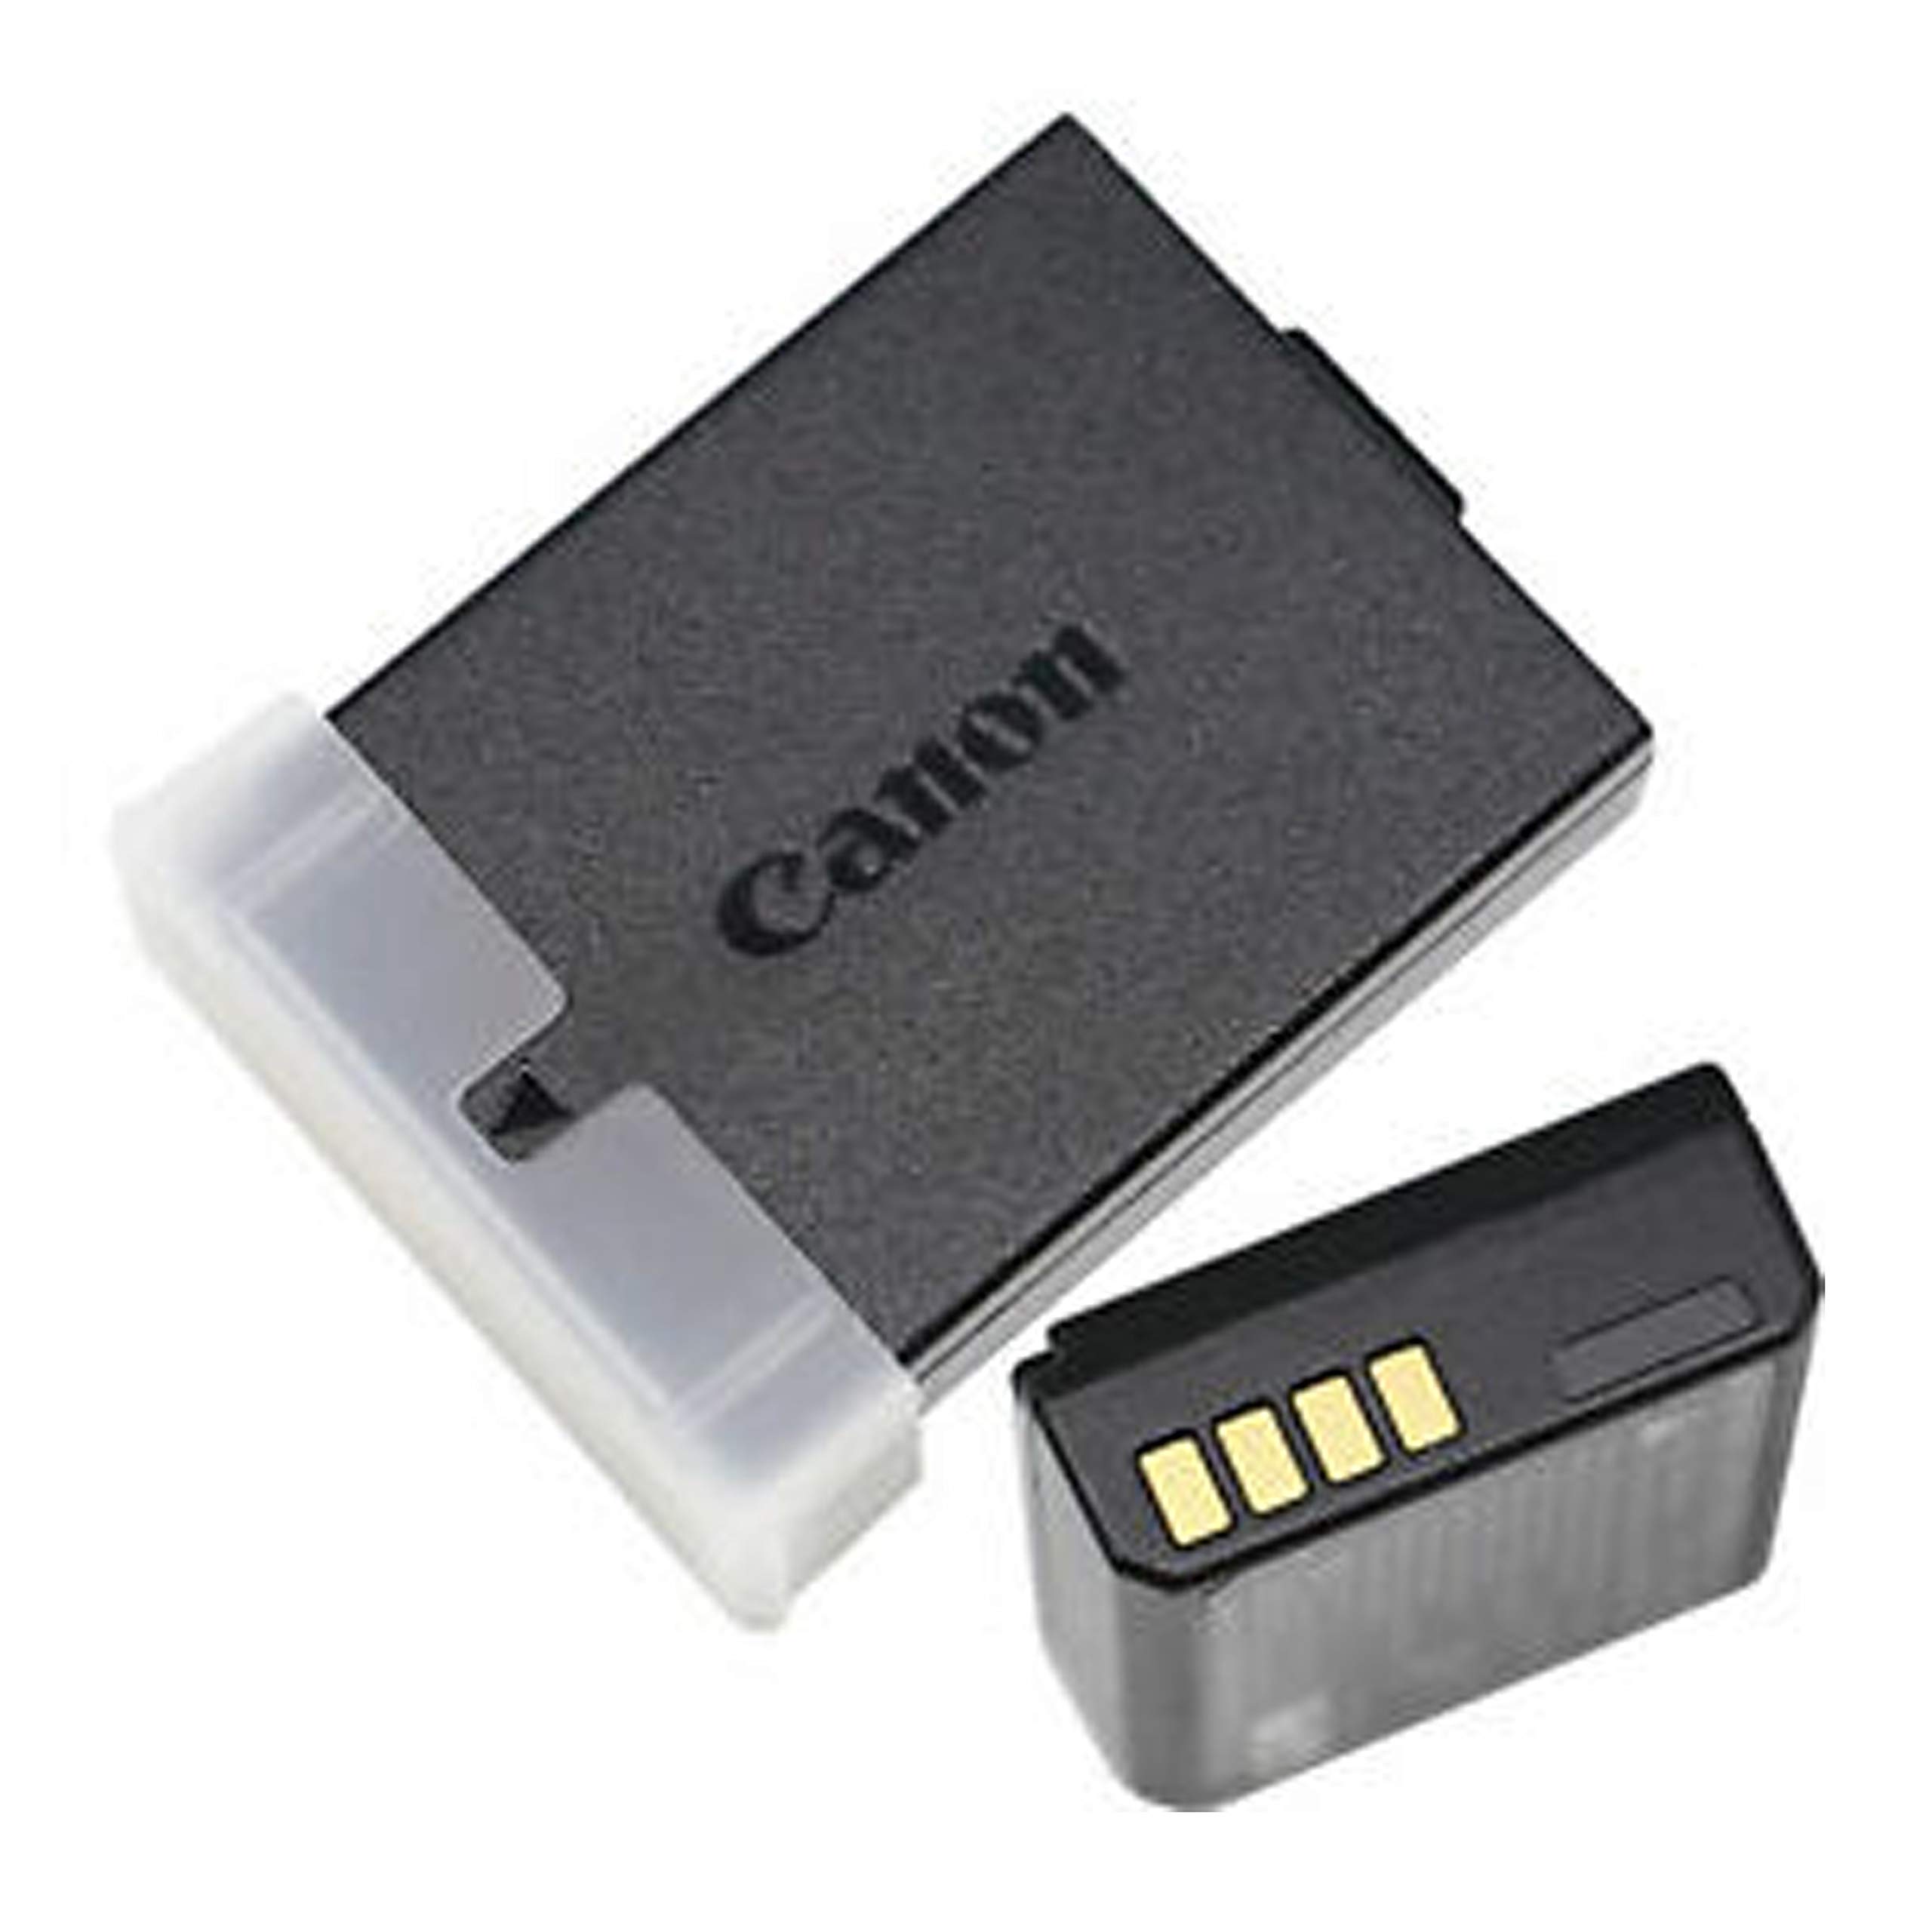 Canon LP-E12 Lithium-Ion Battery Pack for Canon Eos EOS M M2 M10 M50 M100 M50 Mark II M200 Rebel SL1 Camera(Bulk Packaging)